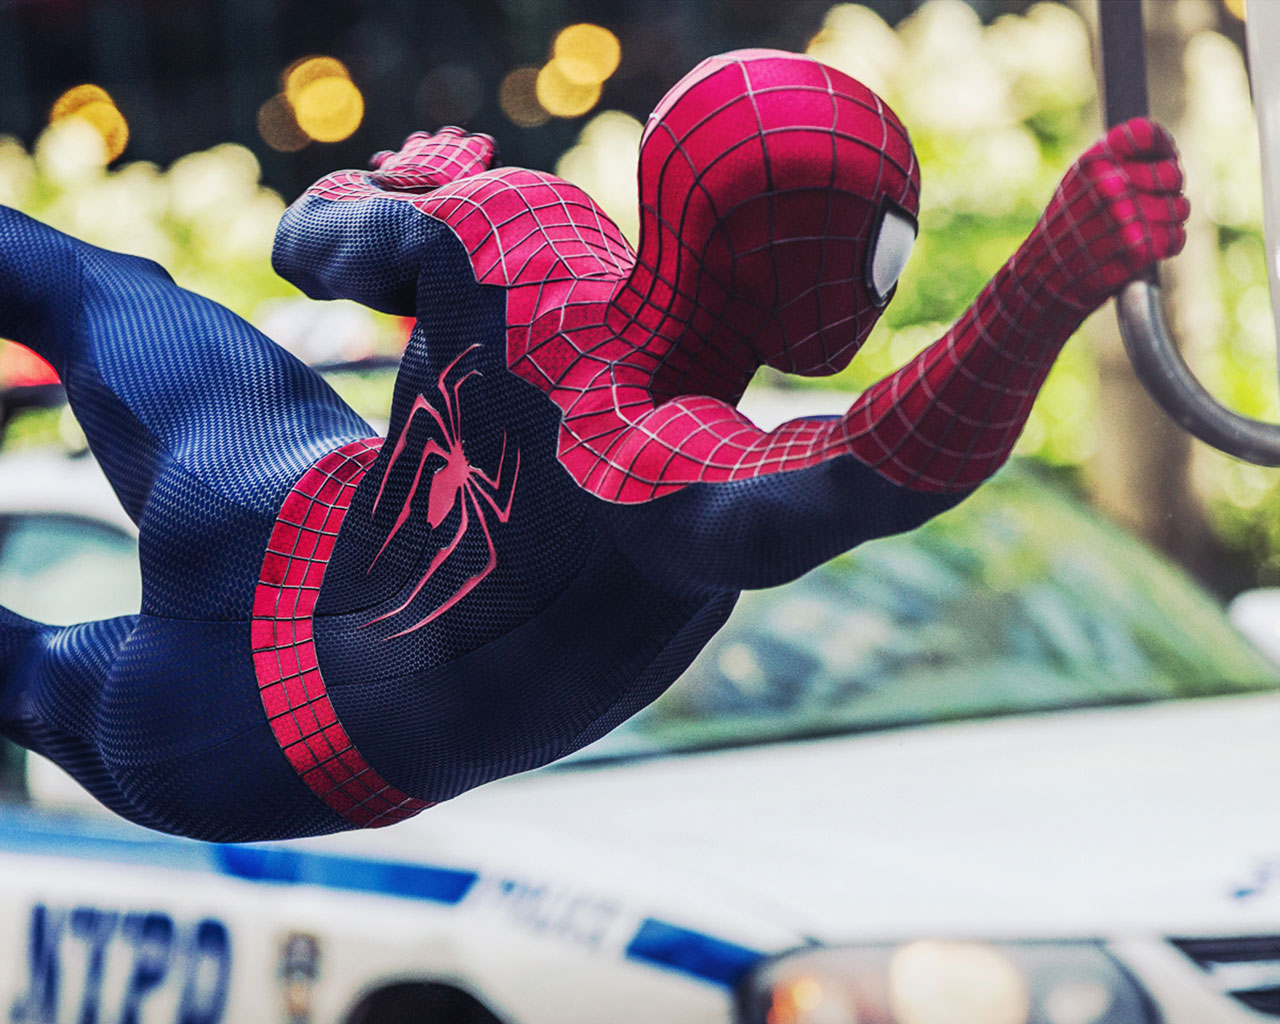 Today i introduced to you the spider man 2 hd wallpapers